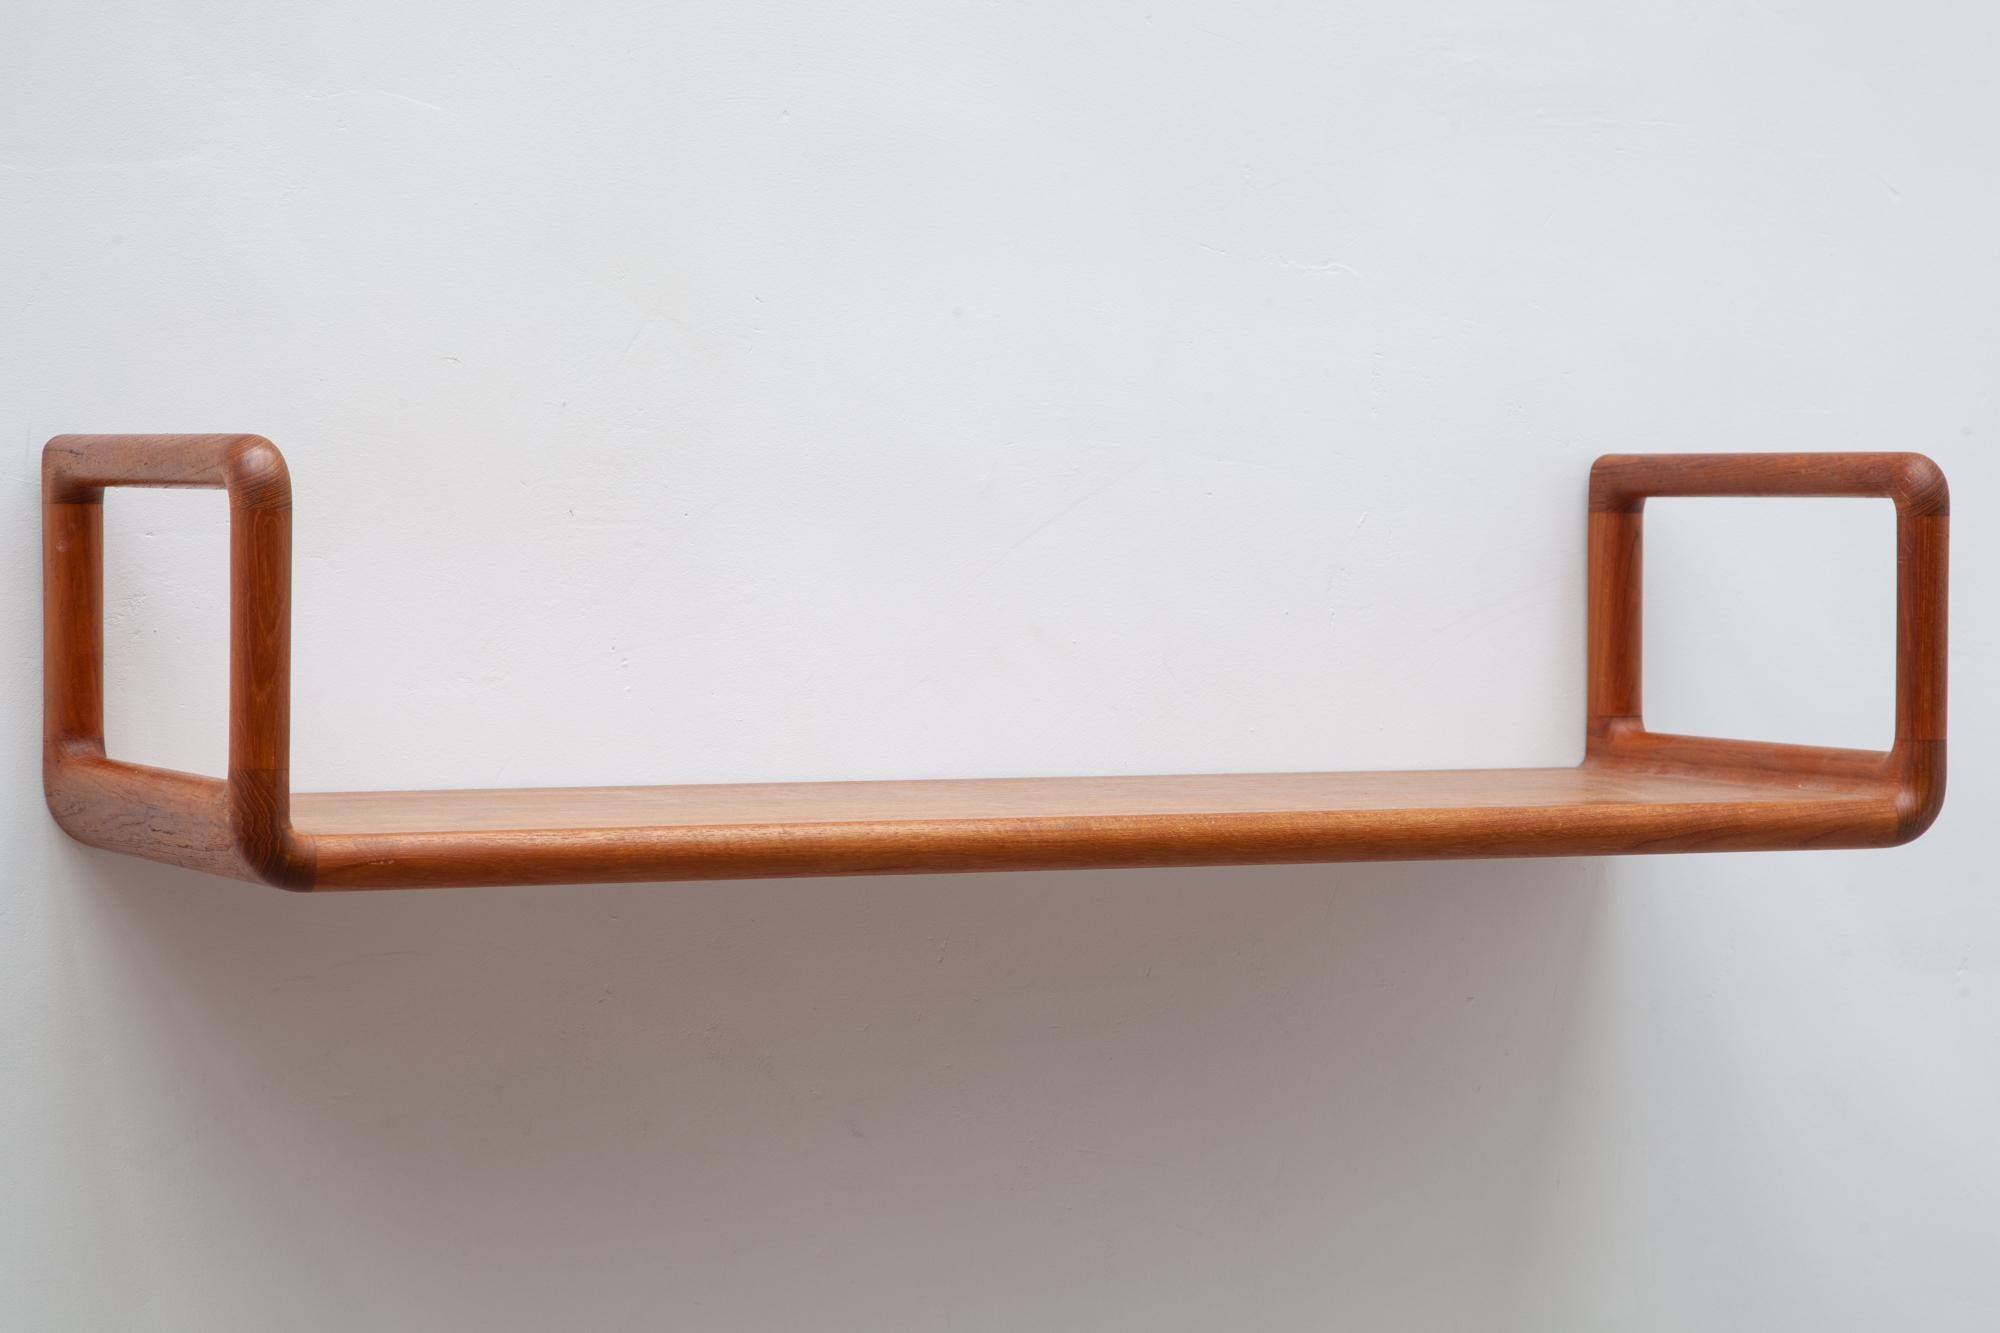 Danish teak wall shelves in classic midcentury design by Kai Kristiansen. Hanging style with soft rounded edges.
These teak shelves are a perfect example of a simple Danish design. Invisible hardware on the back creates a floating-on-the-wall